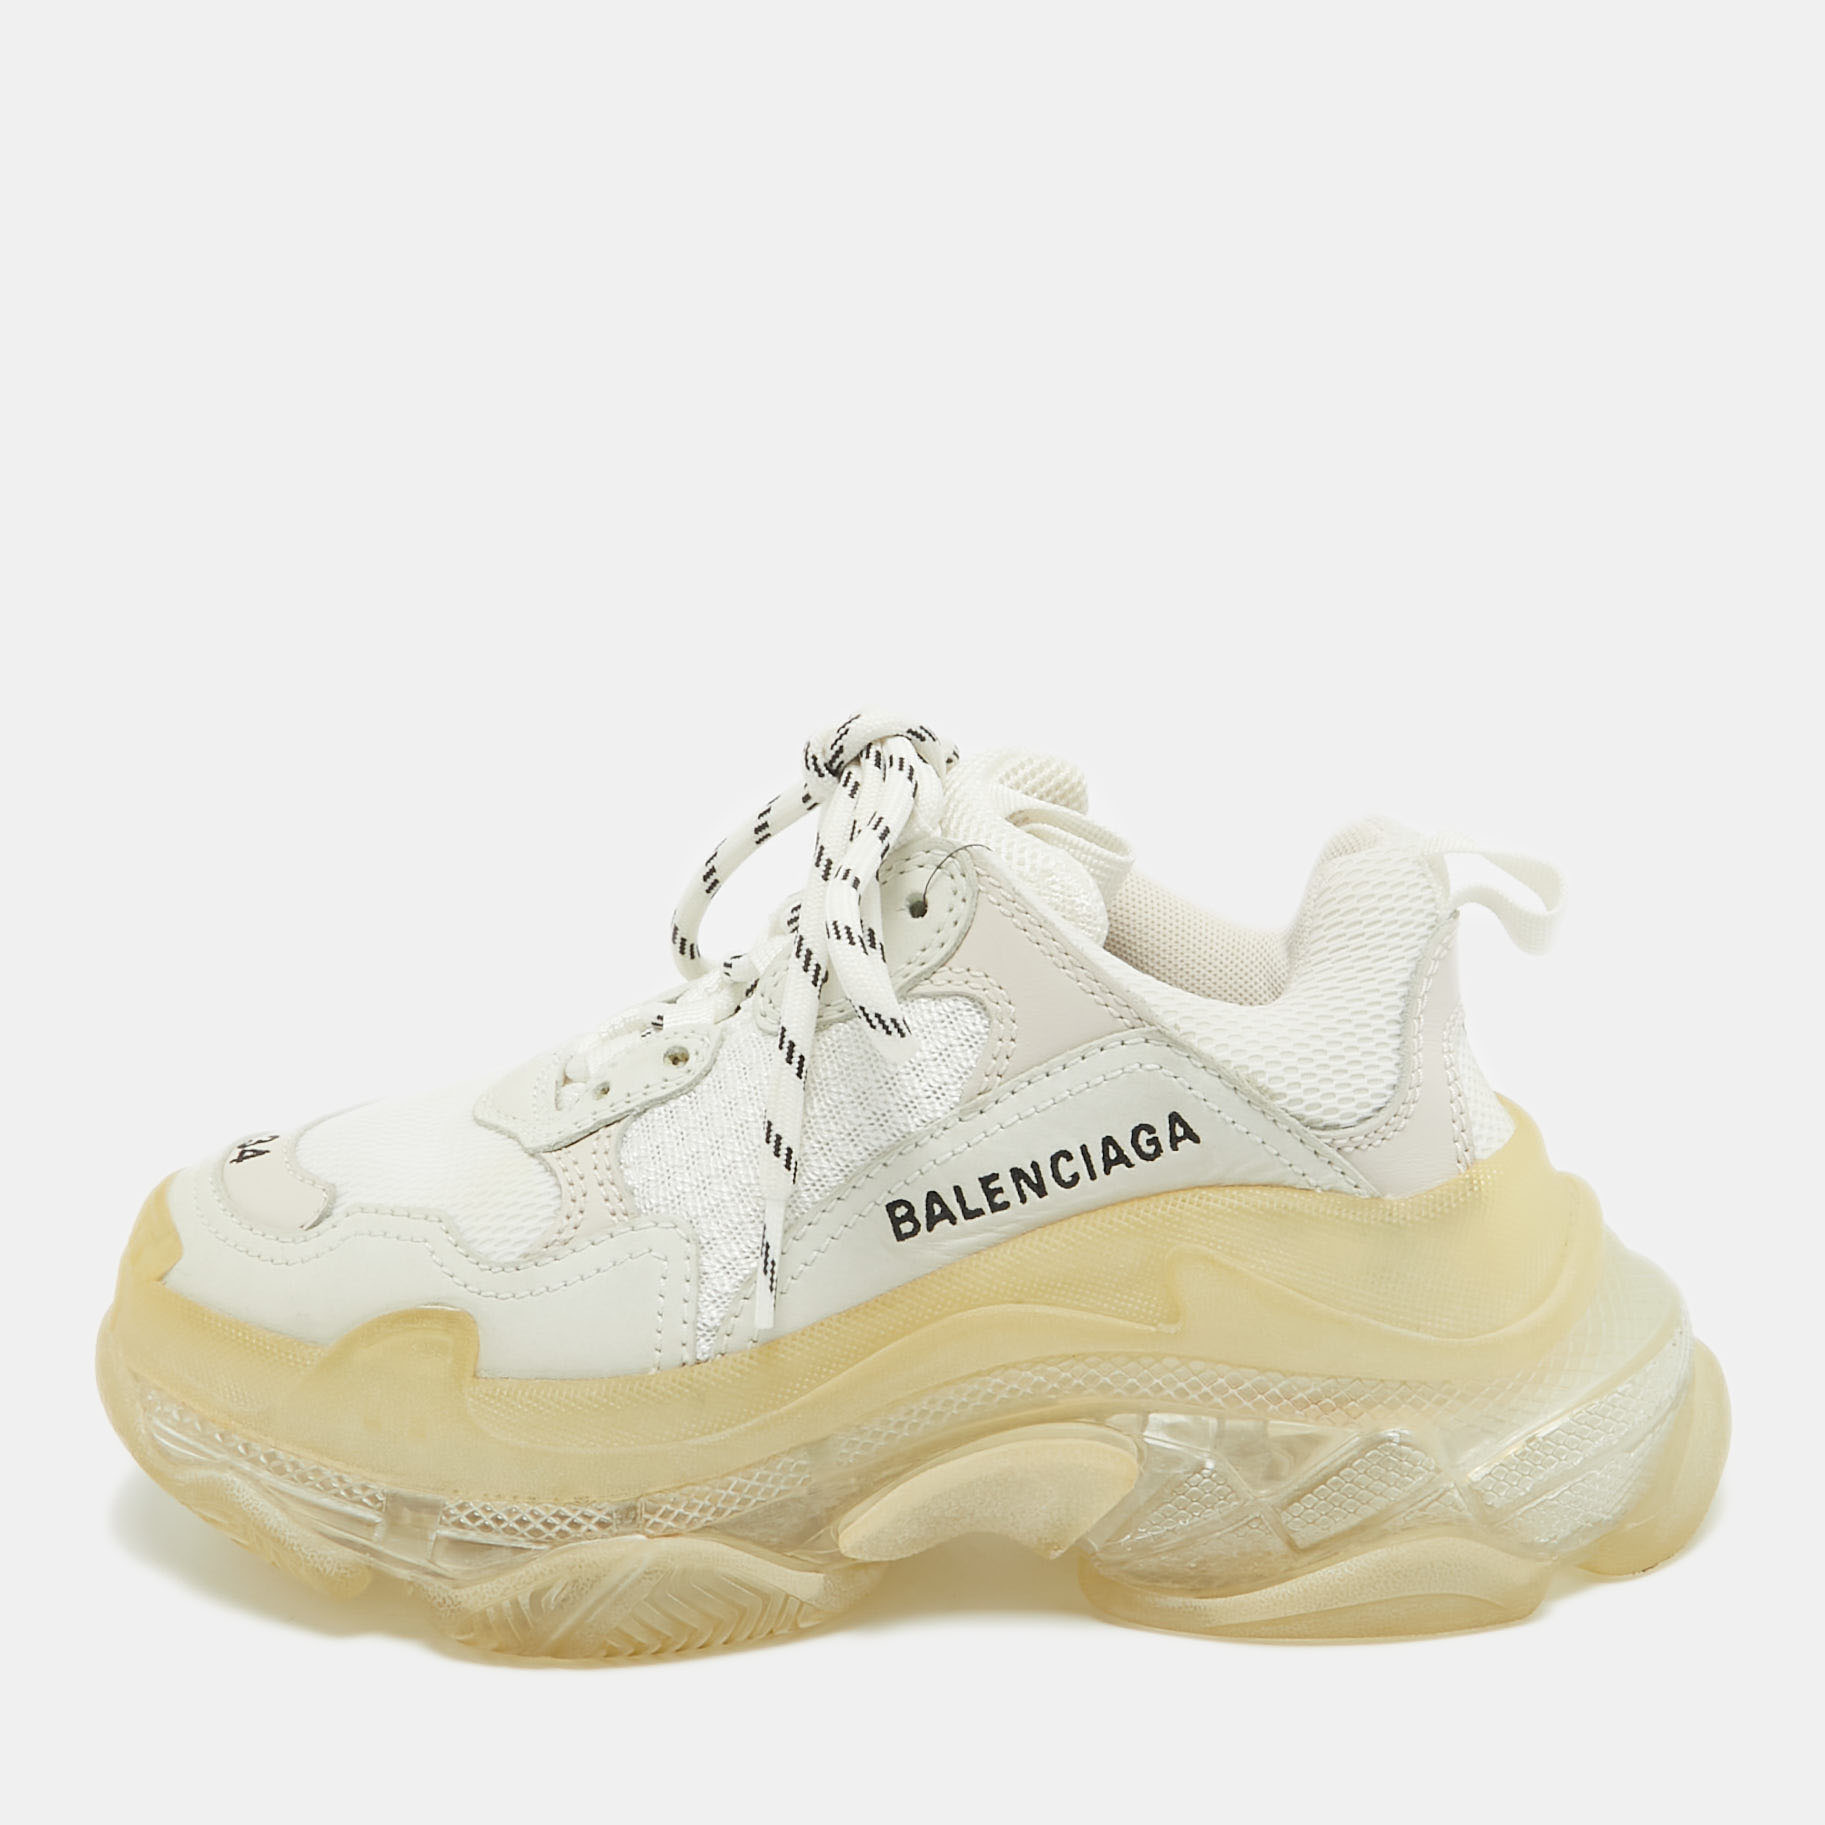 Balenciaga white mesh and leather triple s clear sole sneakers size 34